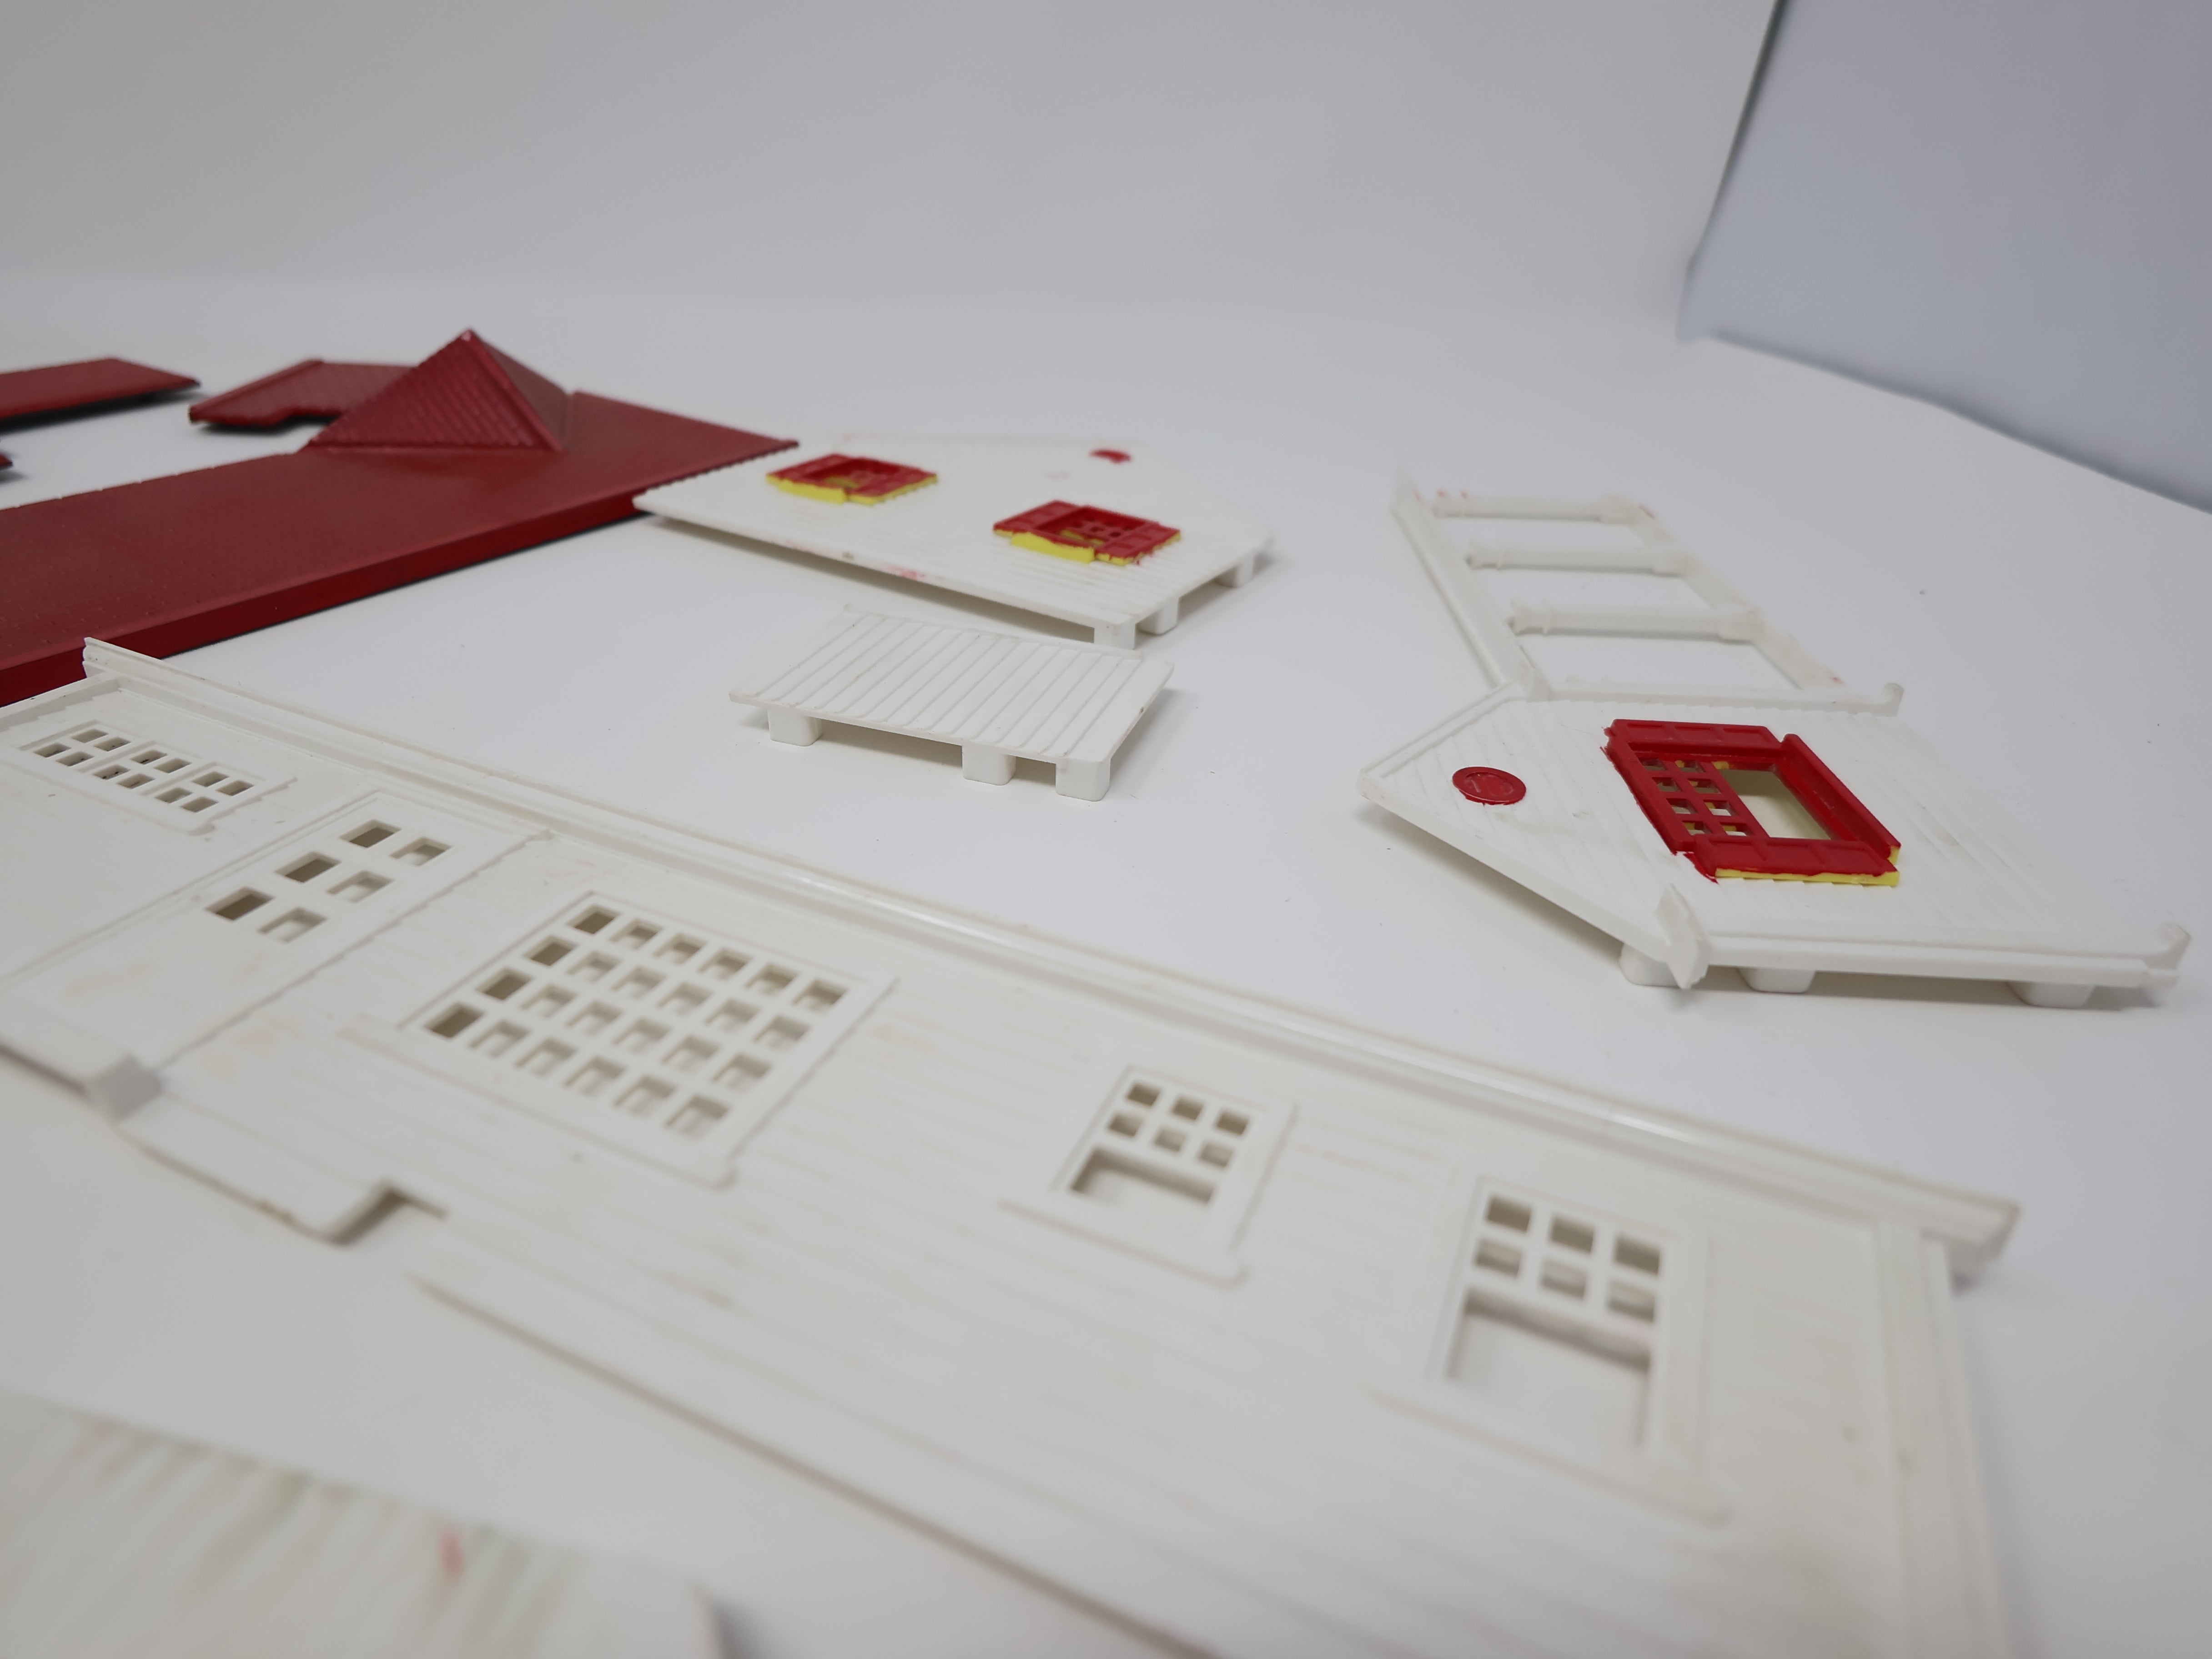 USED Bachmann Plasticville O, White Home with Red Shutters (may be incomplete) (KIT)